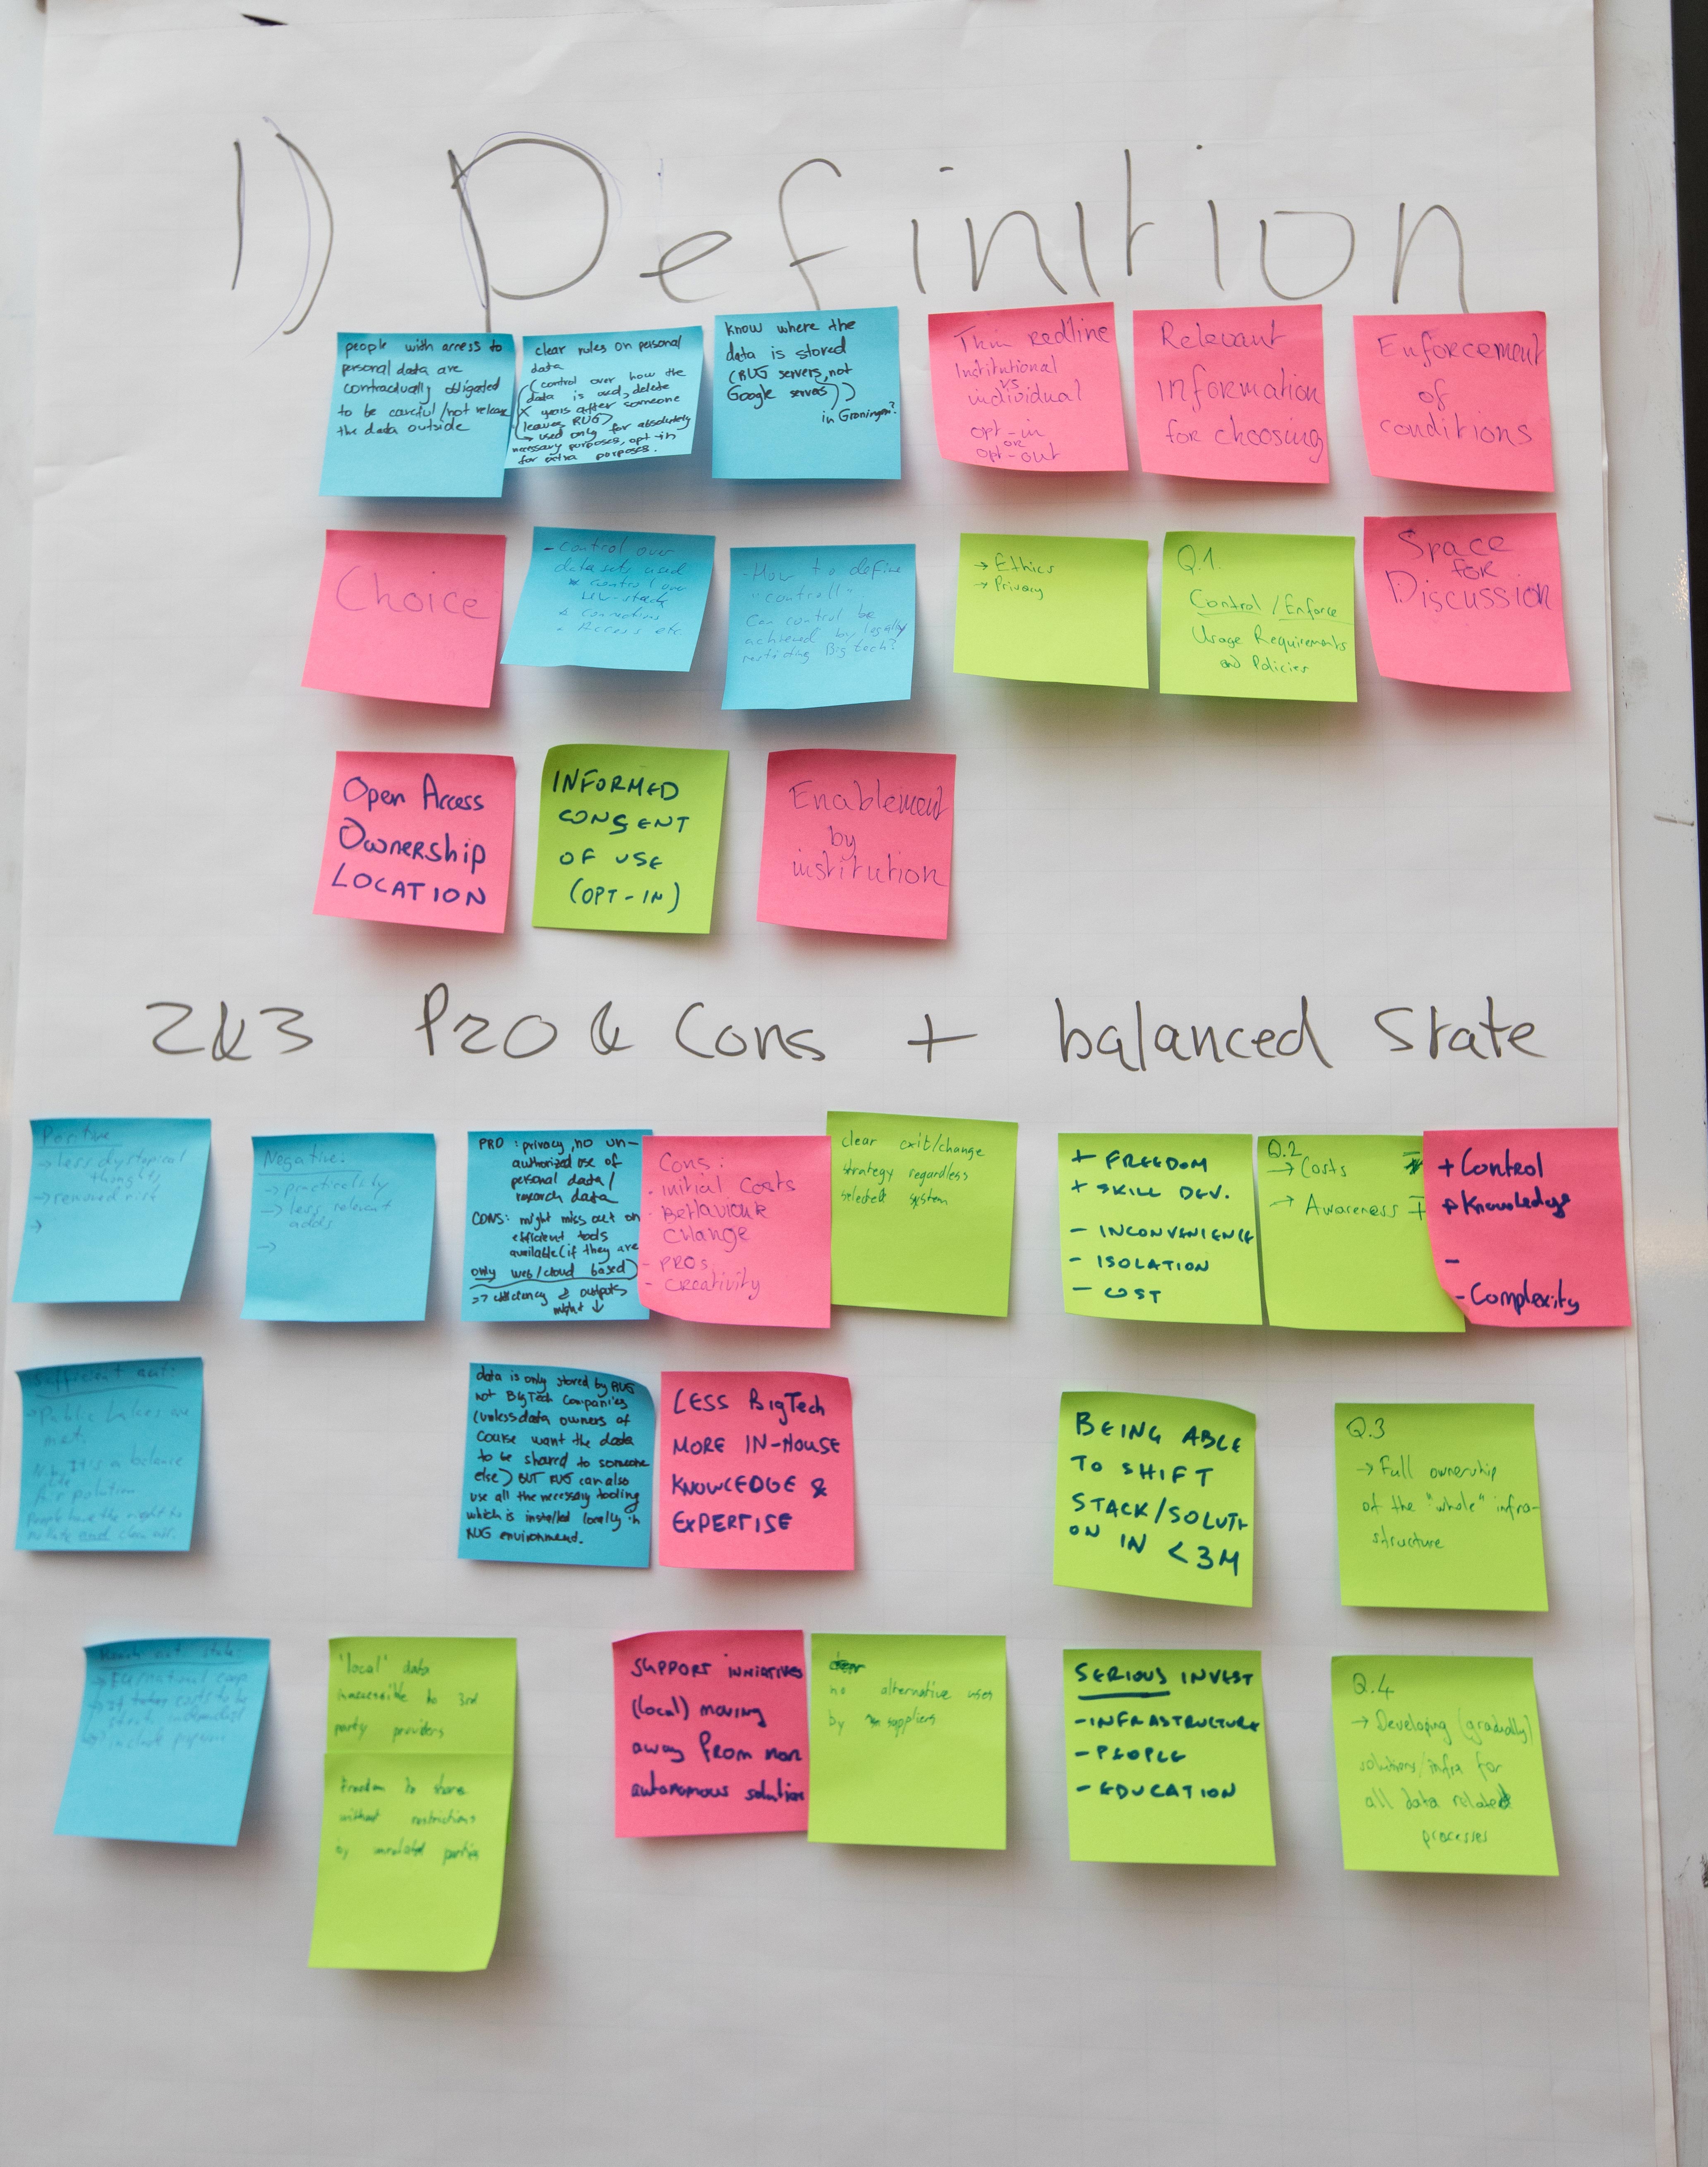 Picture of the outcome of the Let's talk Data Autonomy Event